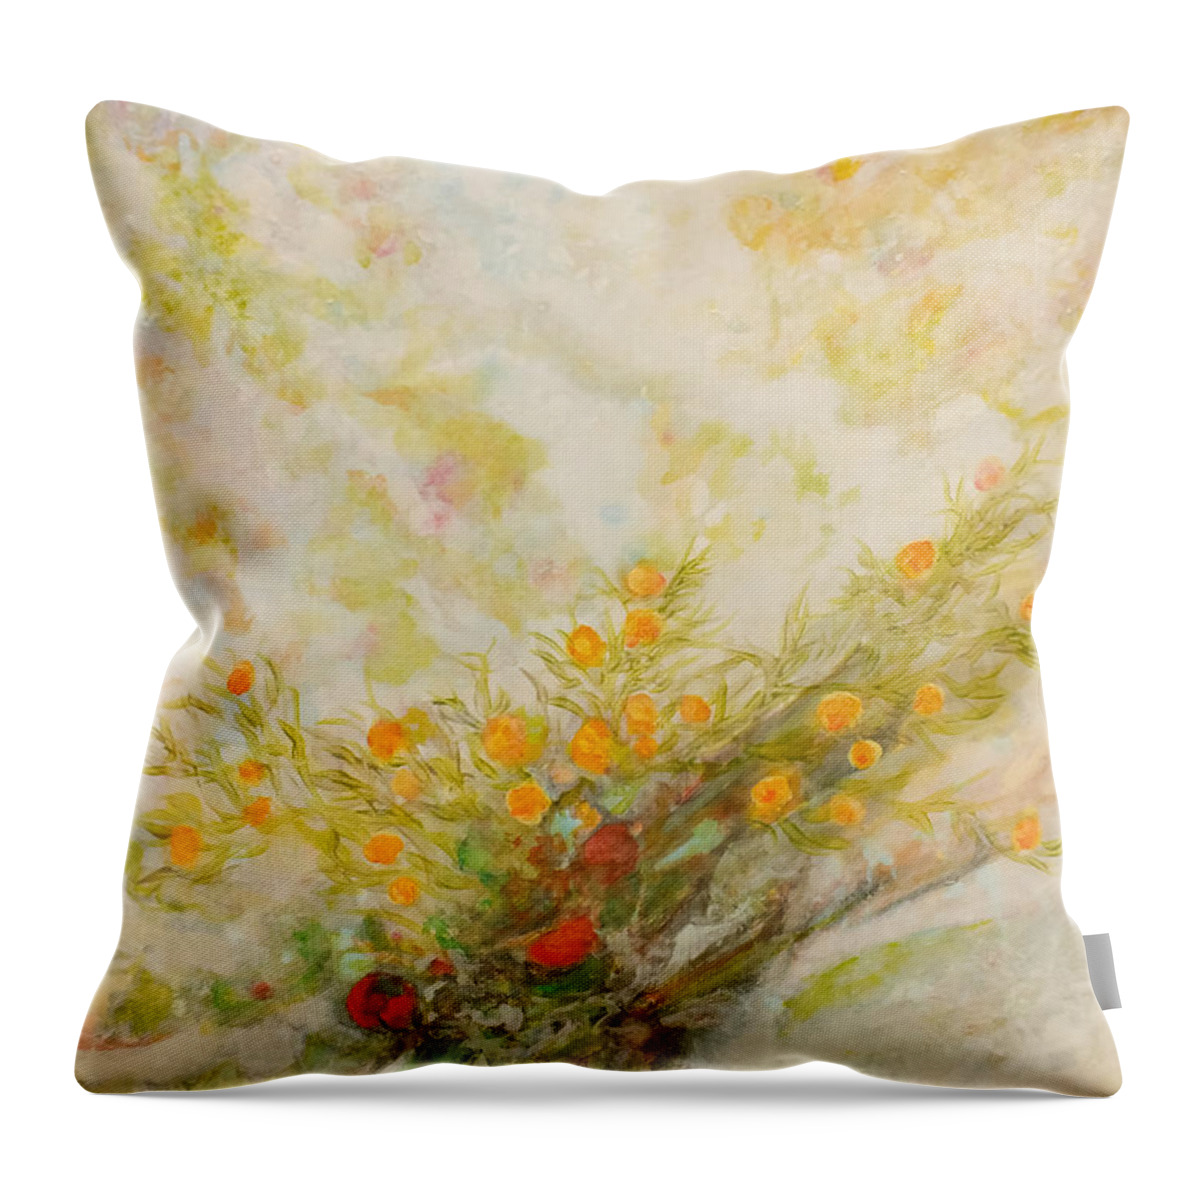 Calming Anger Throw Pillow featuring the painting Paroles Douce by Marc Dmytryshyn